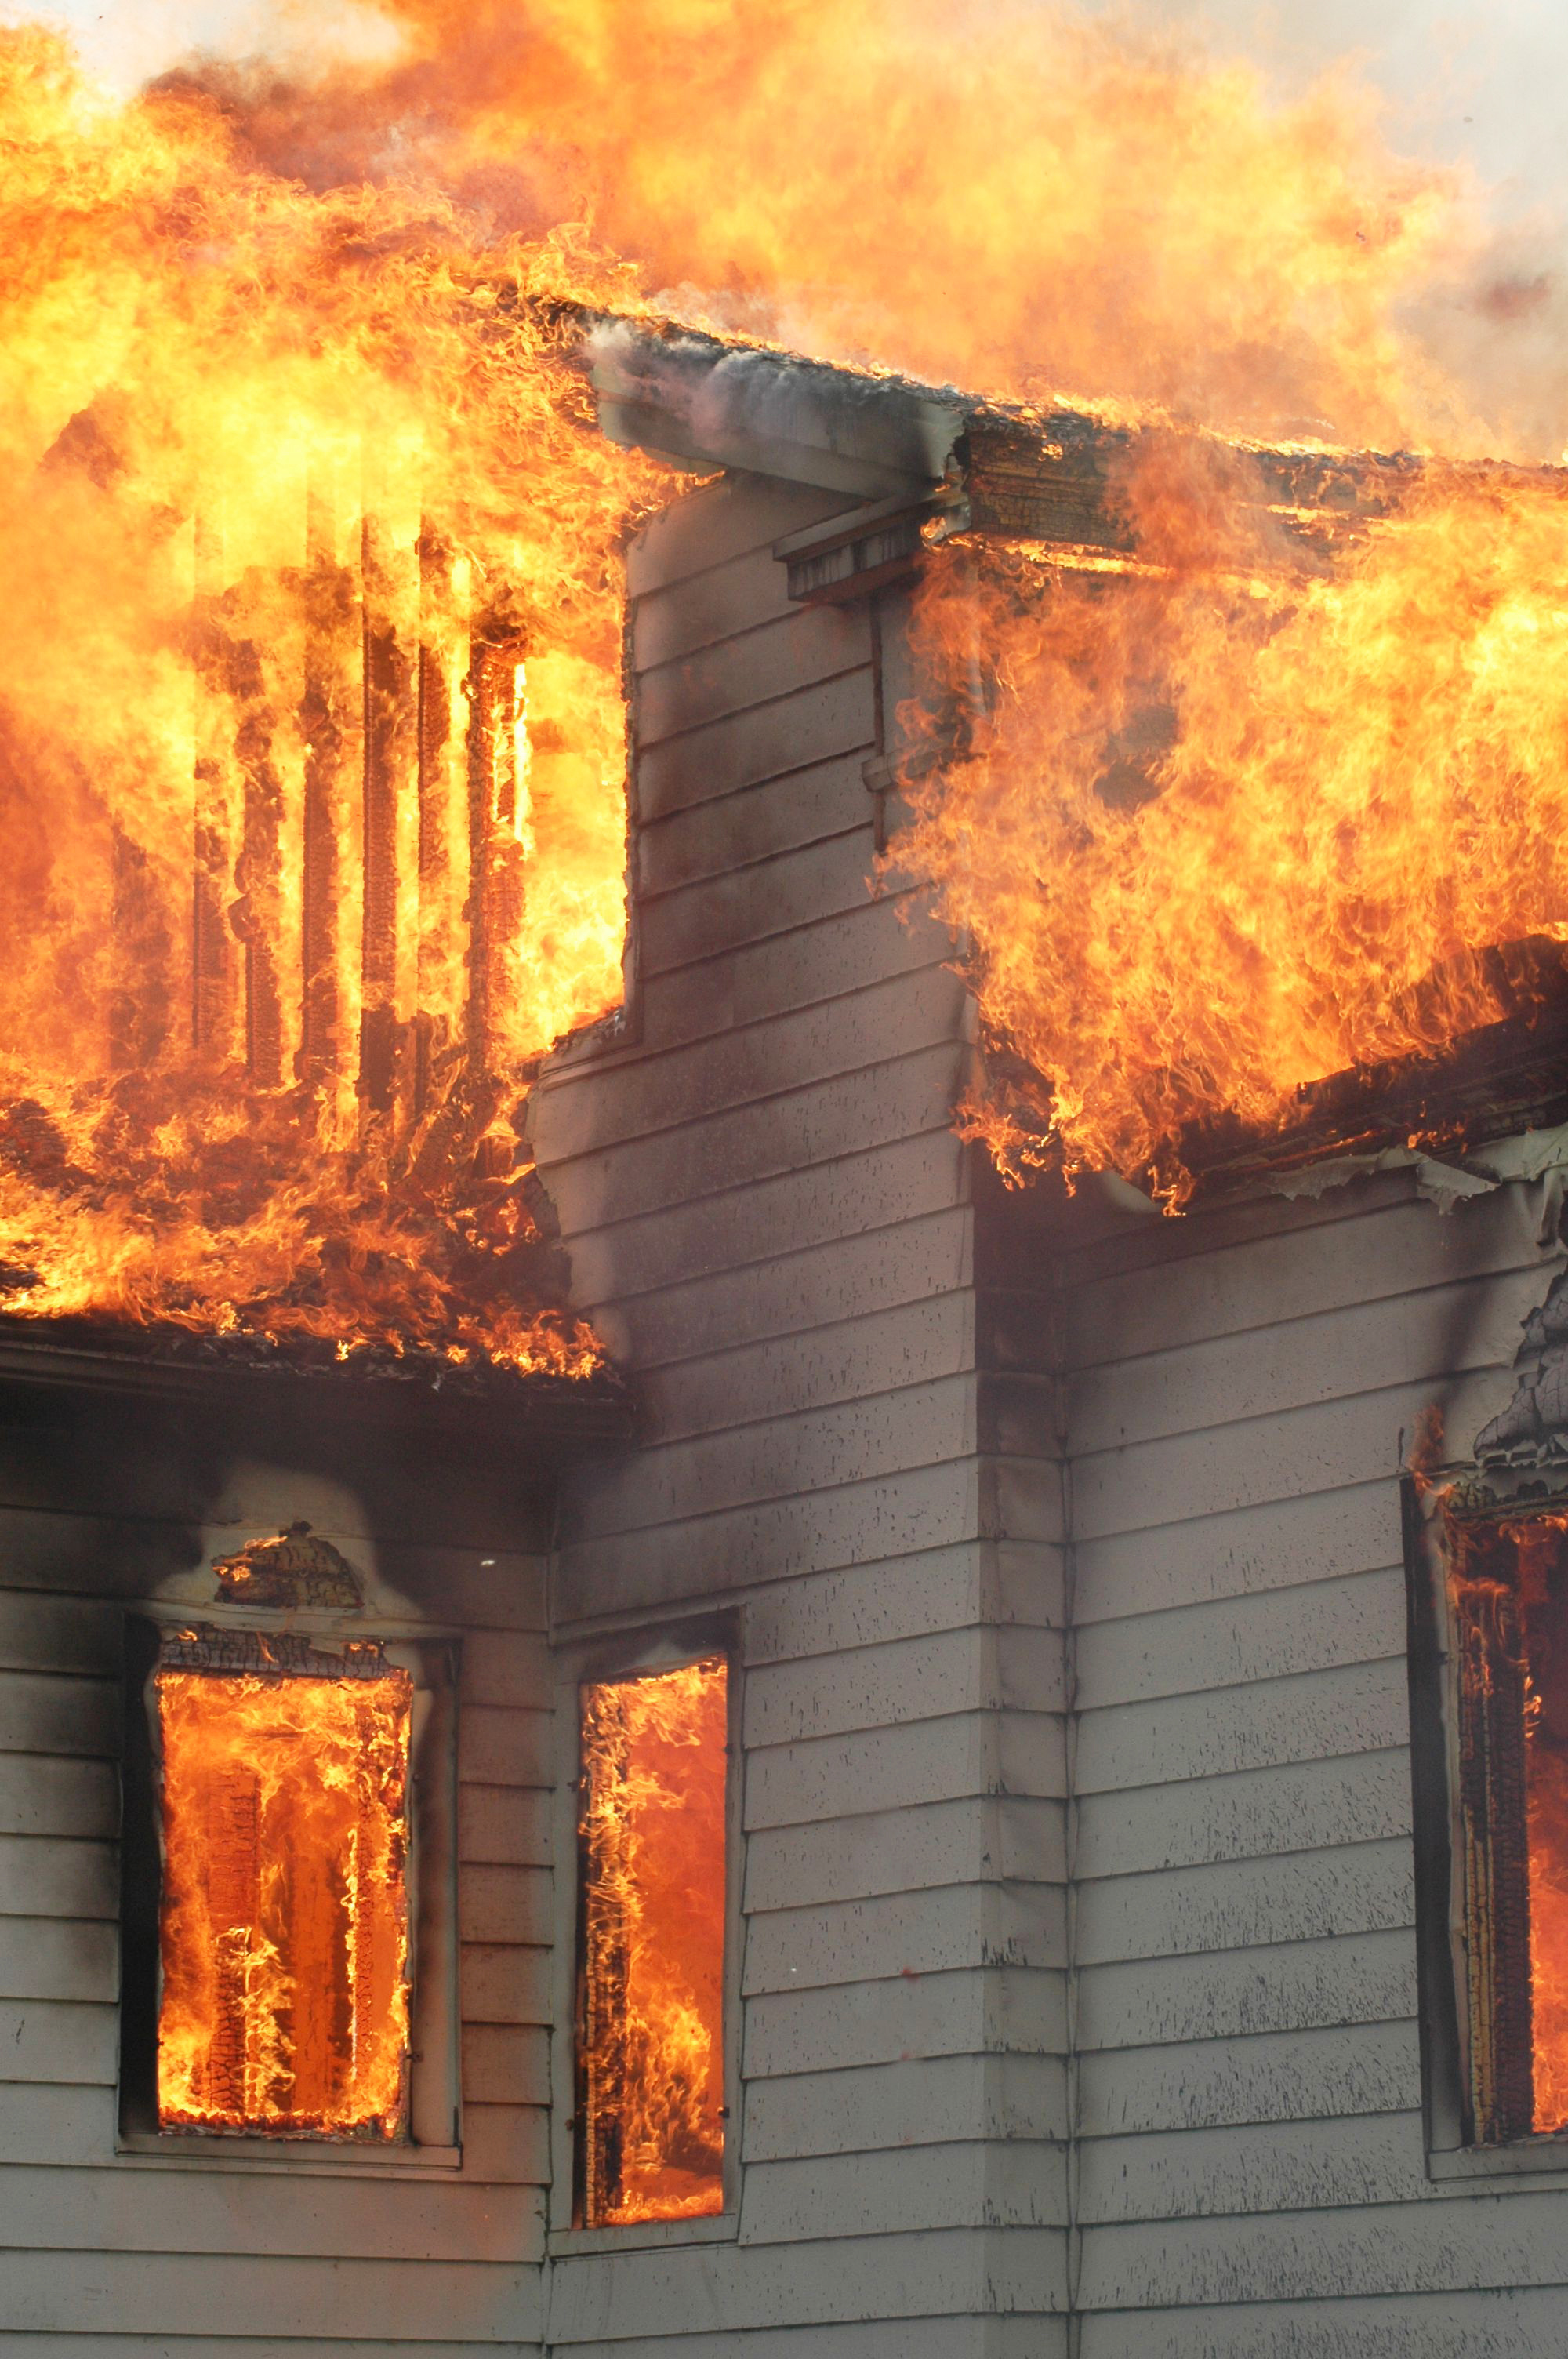 Fast Moving Residential Fires Can Be Deadly Is Vinyl Siding The Culprit